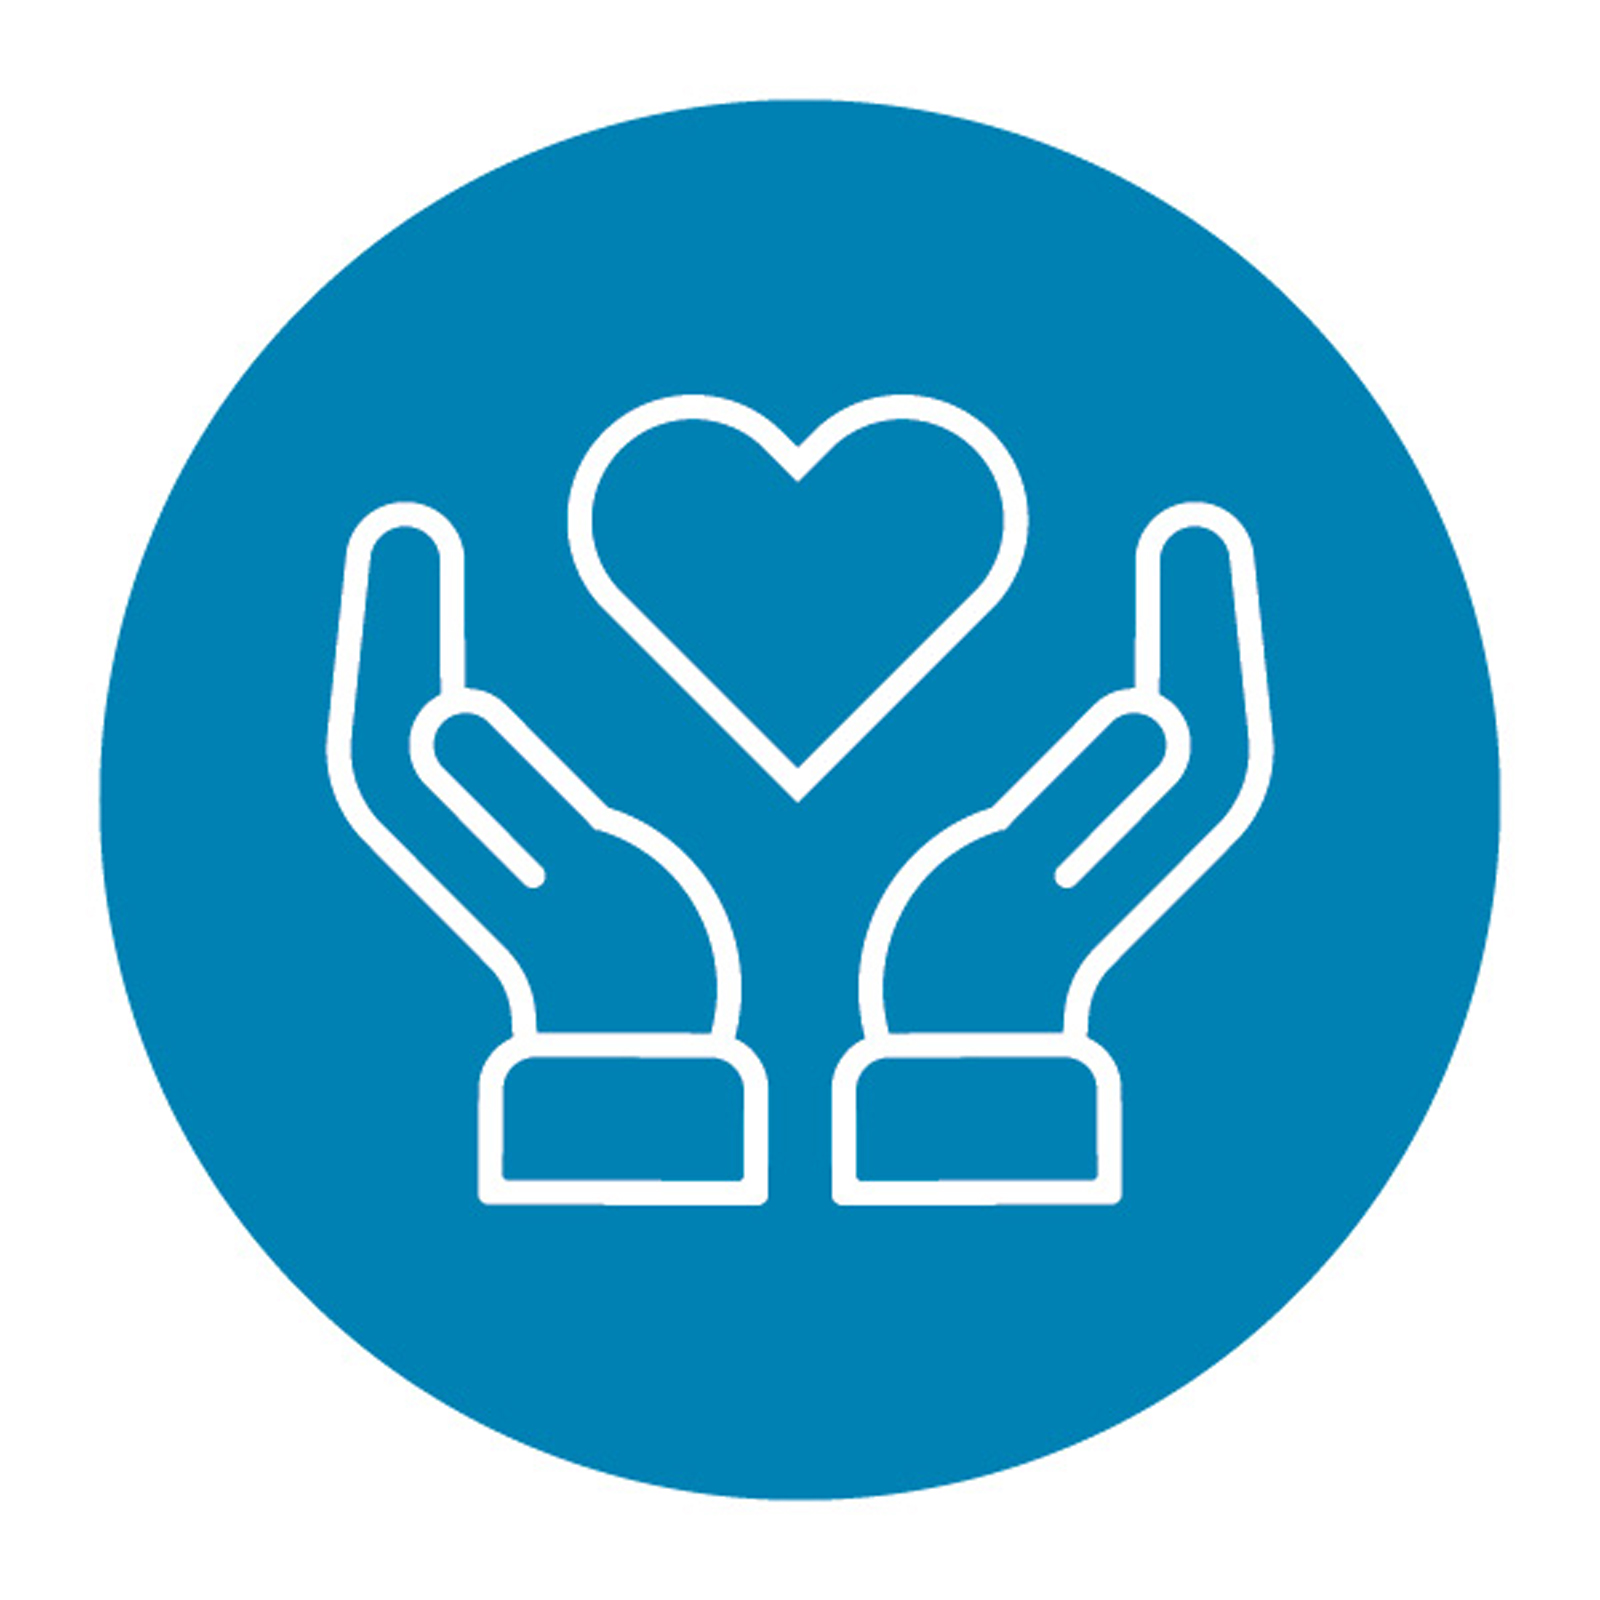 A blue circular sticker with two hands holding a heart shape